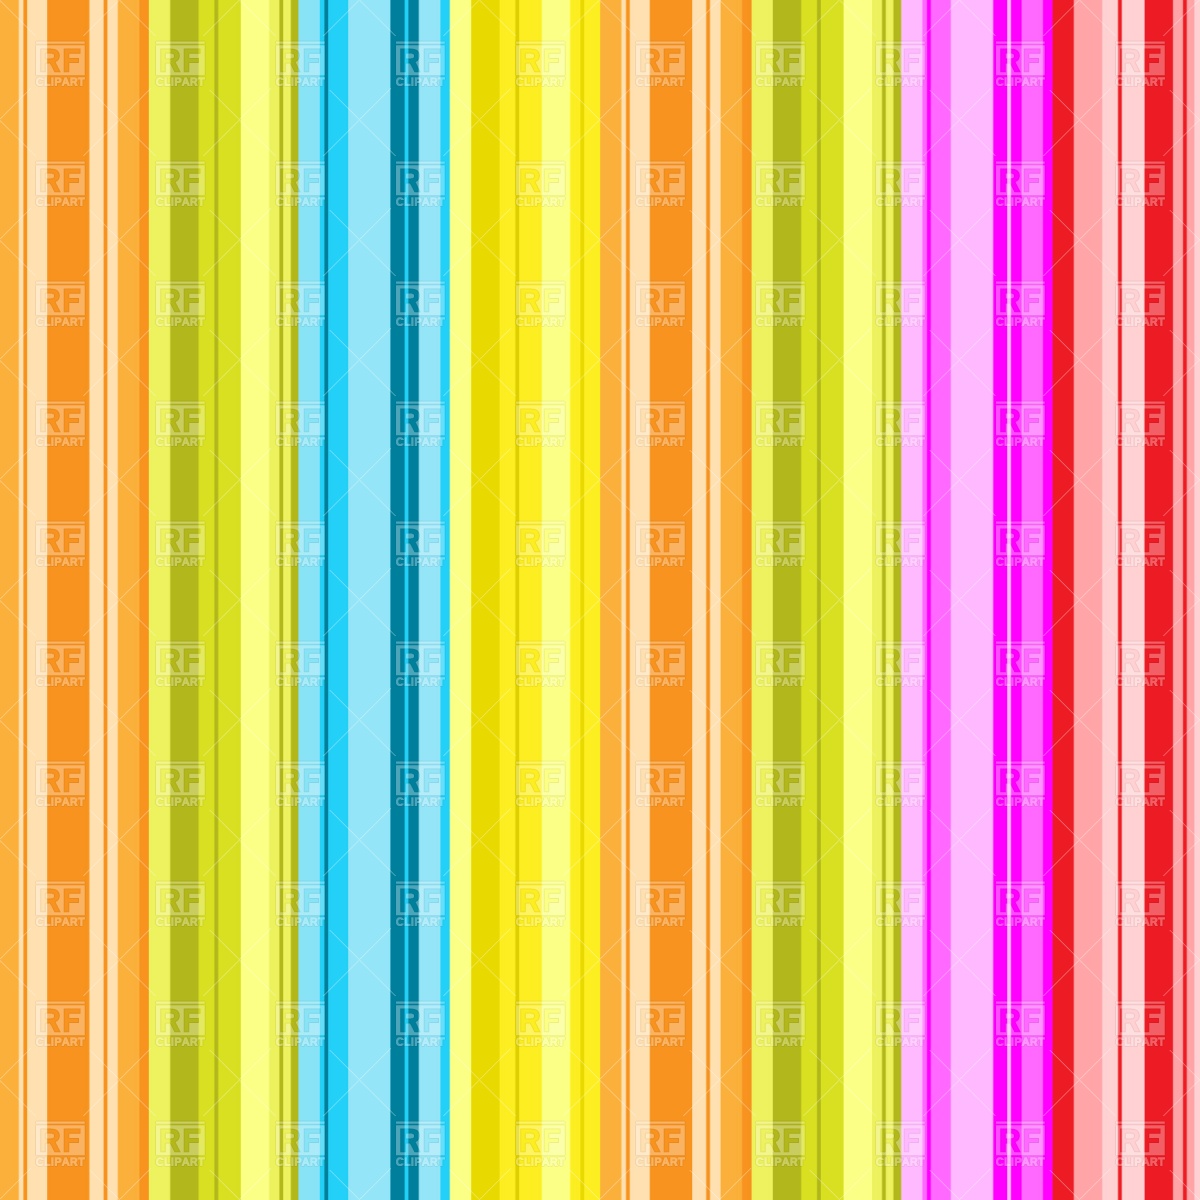 Rainbow striped background Vector Image #837.